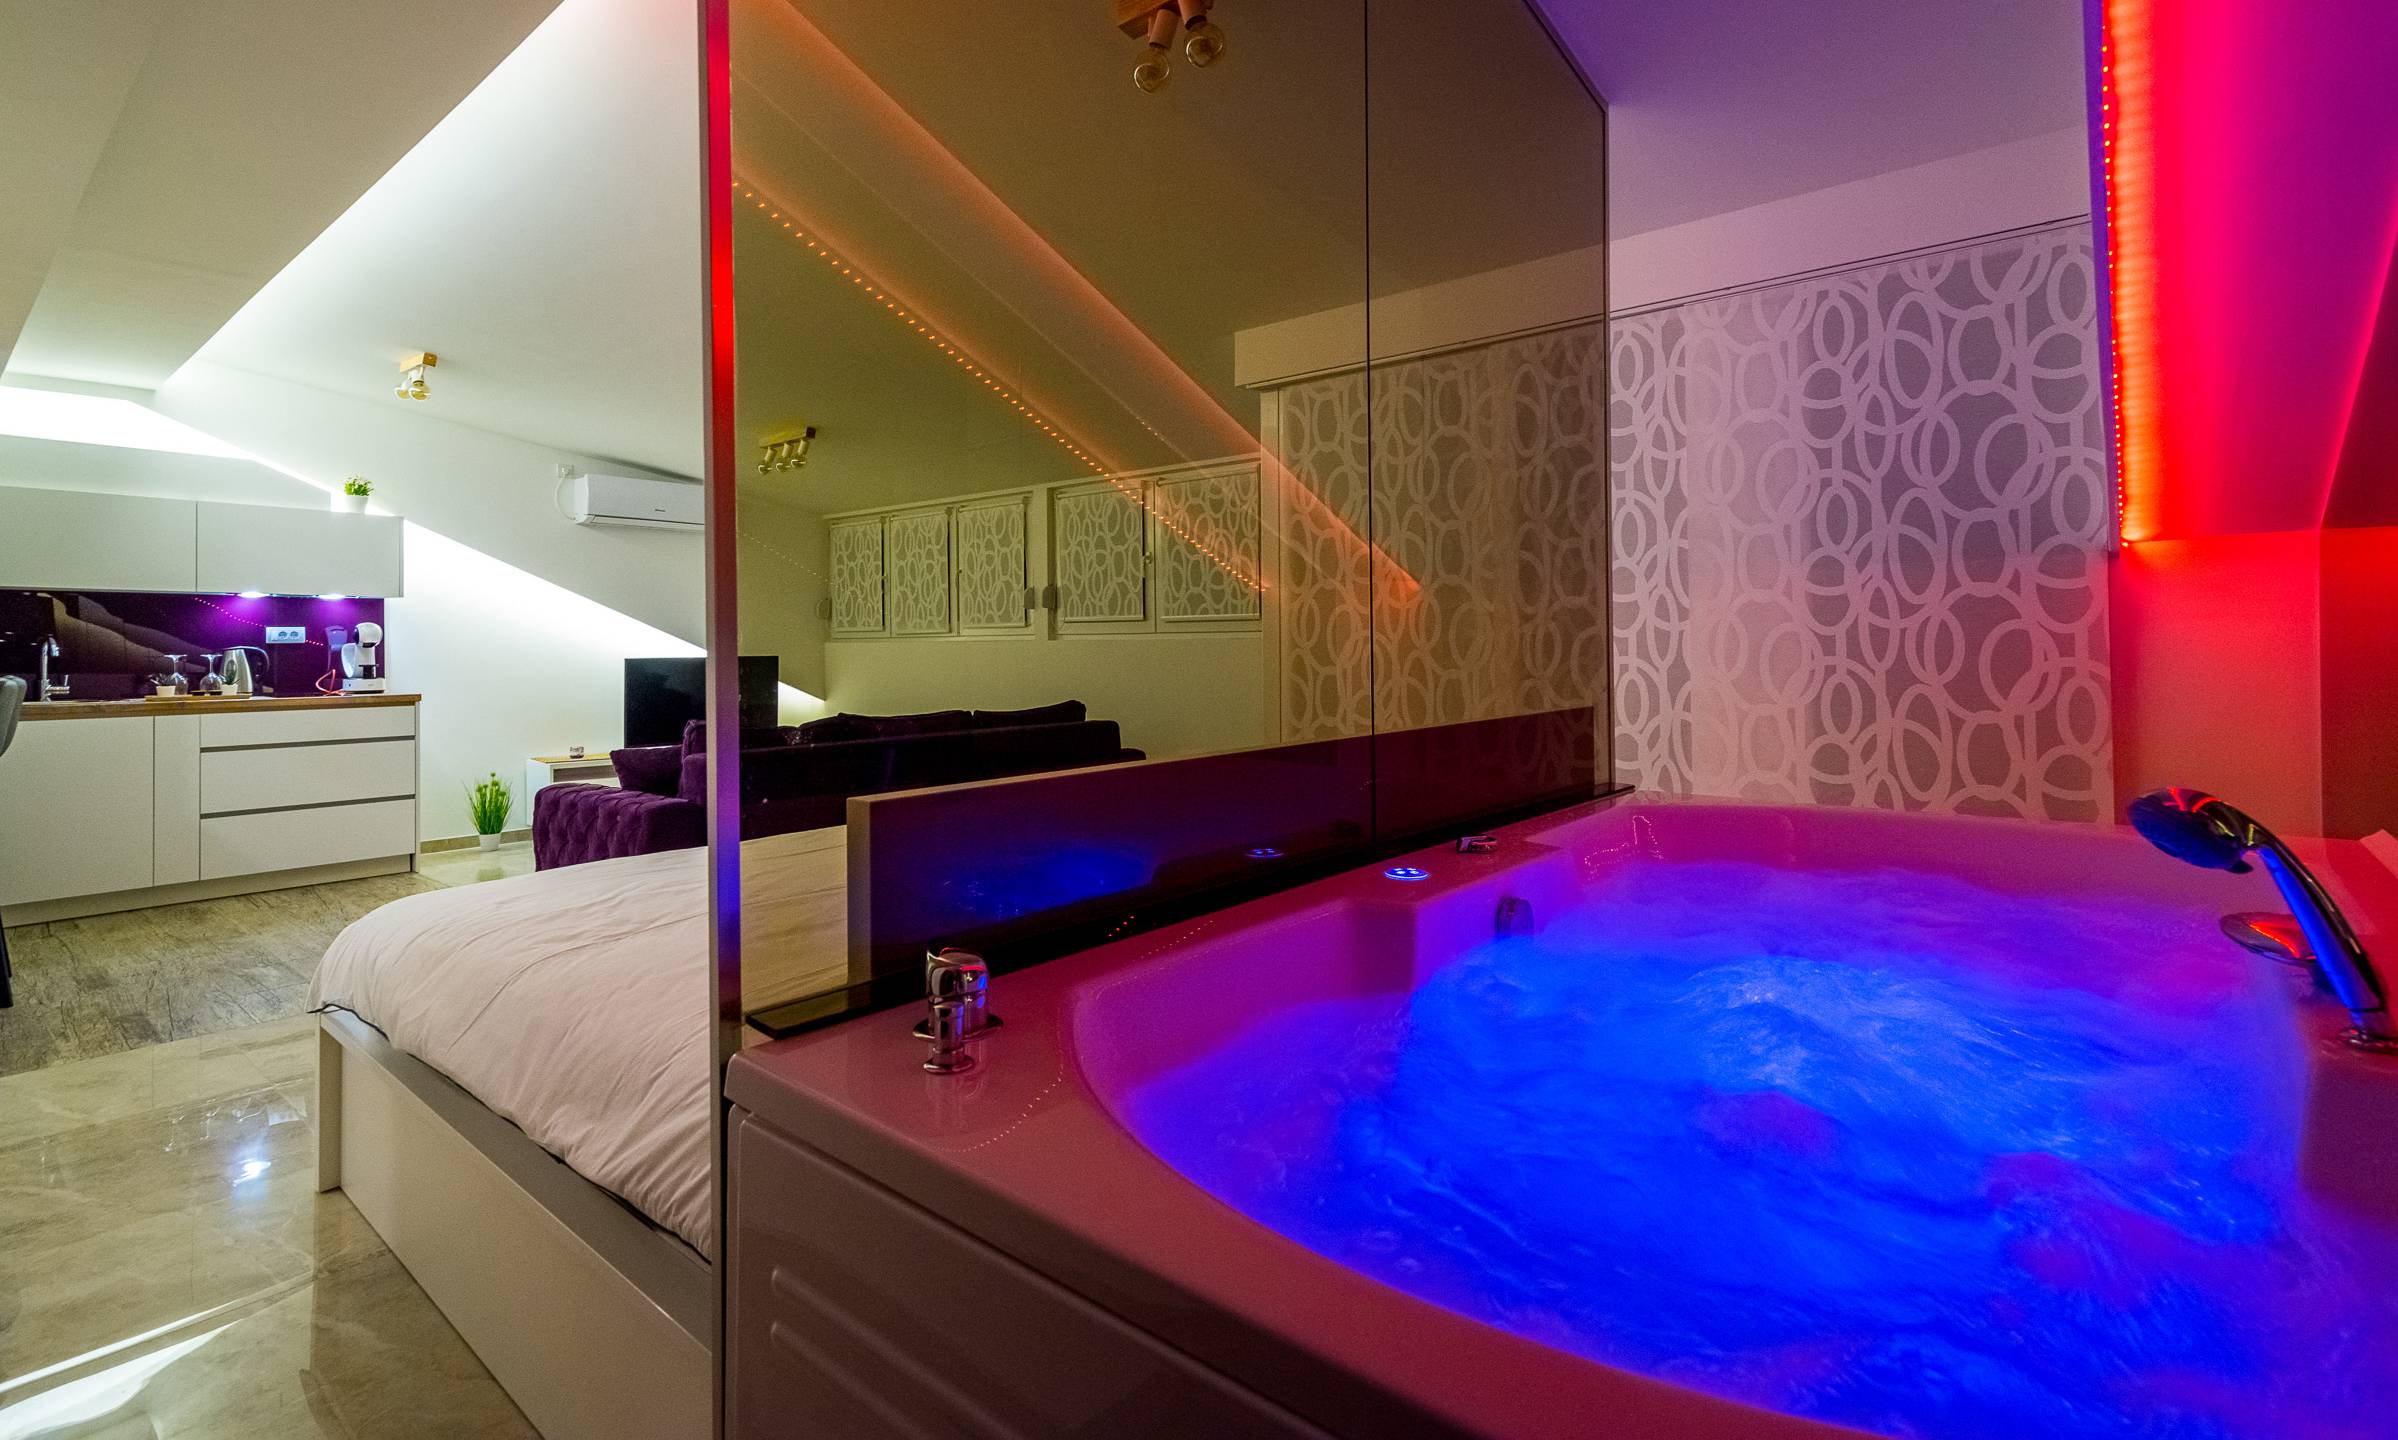 Top 5 spa apartments in 2020